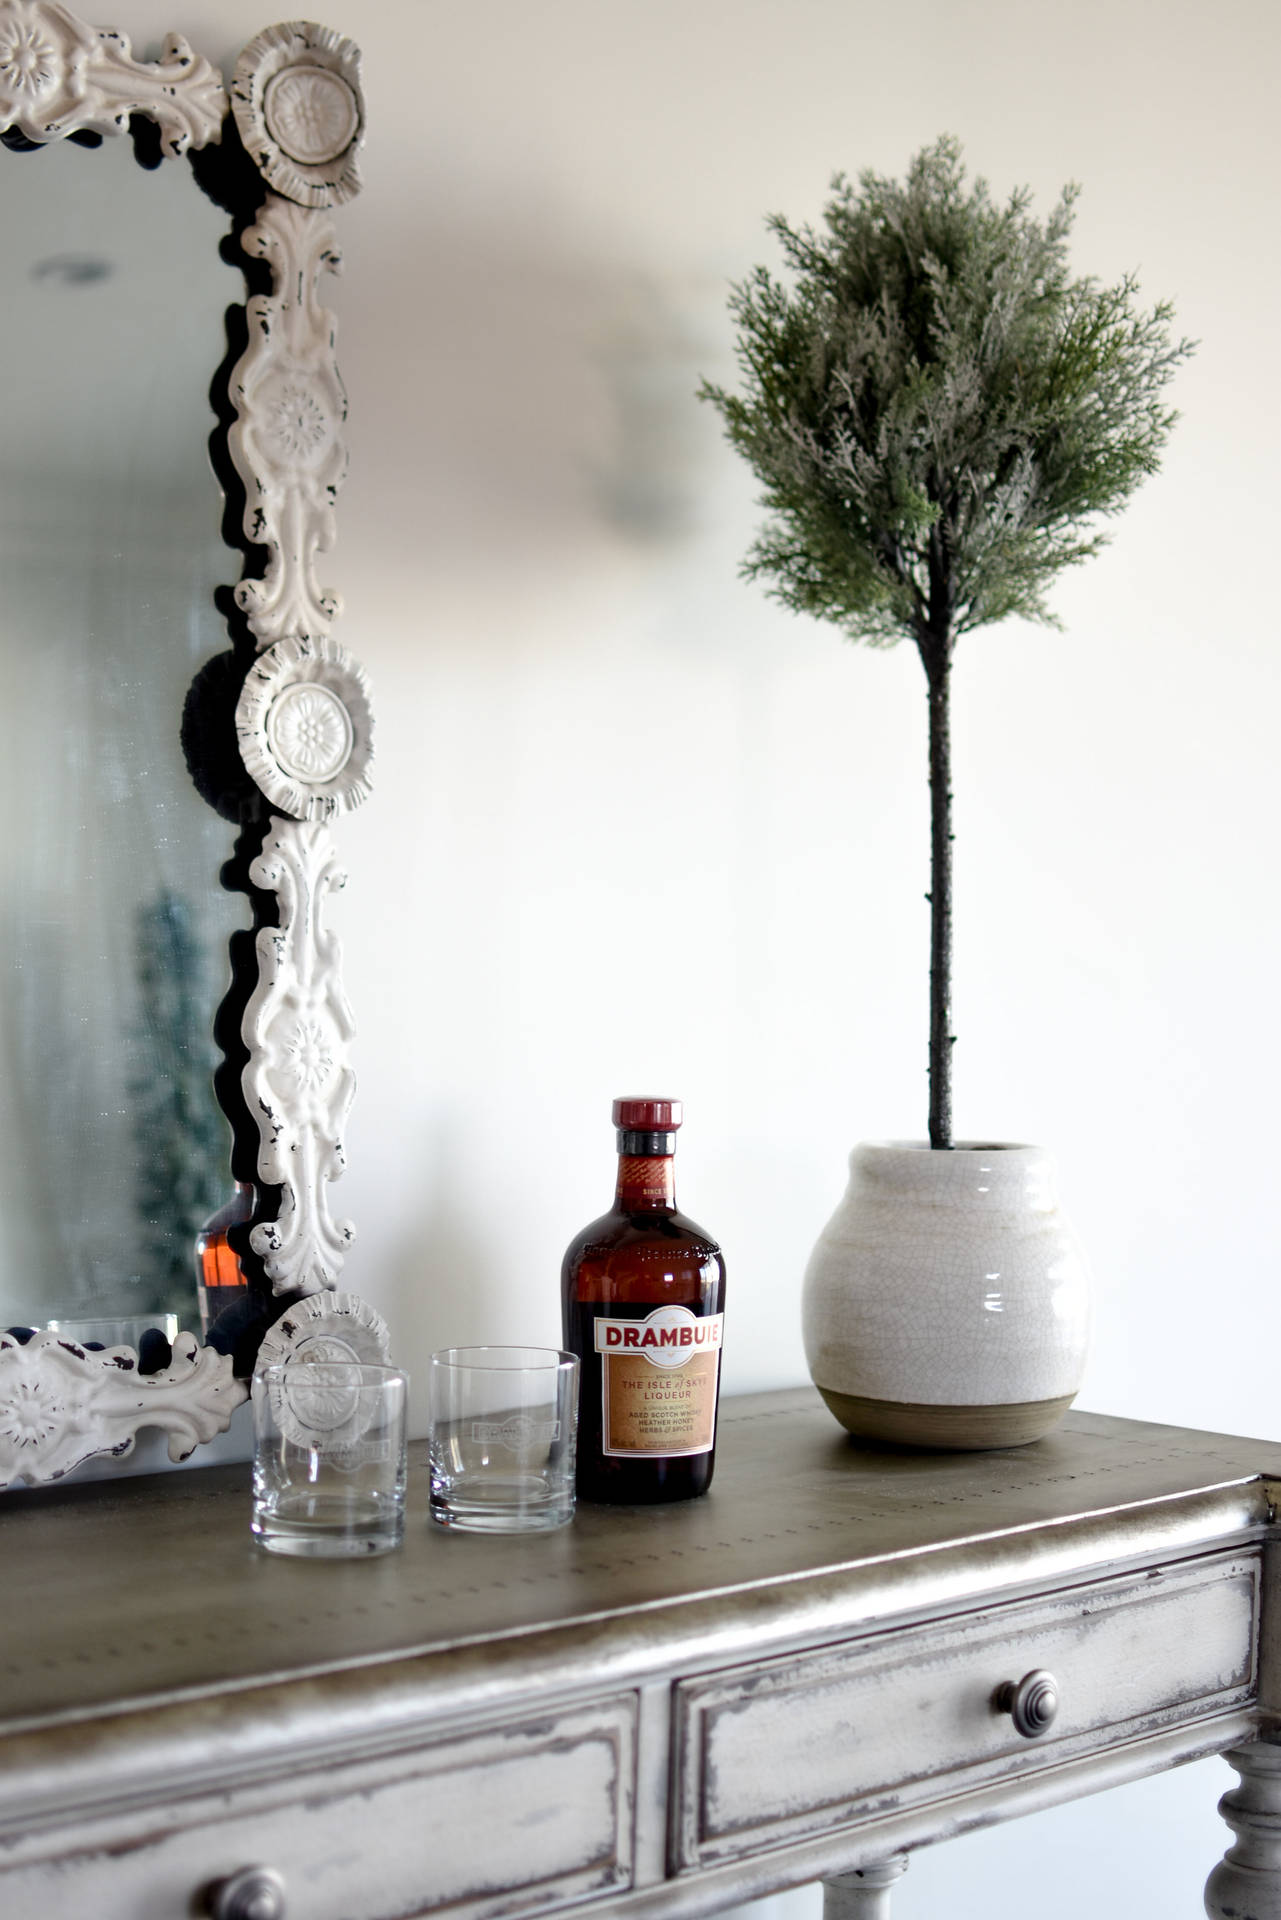 Luxurious Drambuie Scotch Whisky Displayed on Dressing Table Wallpaper